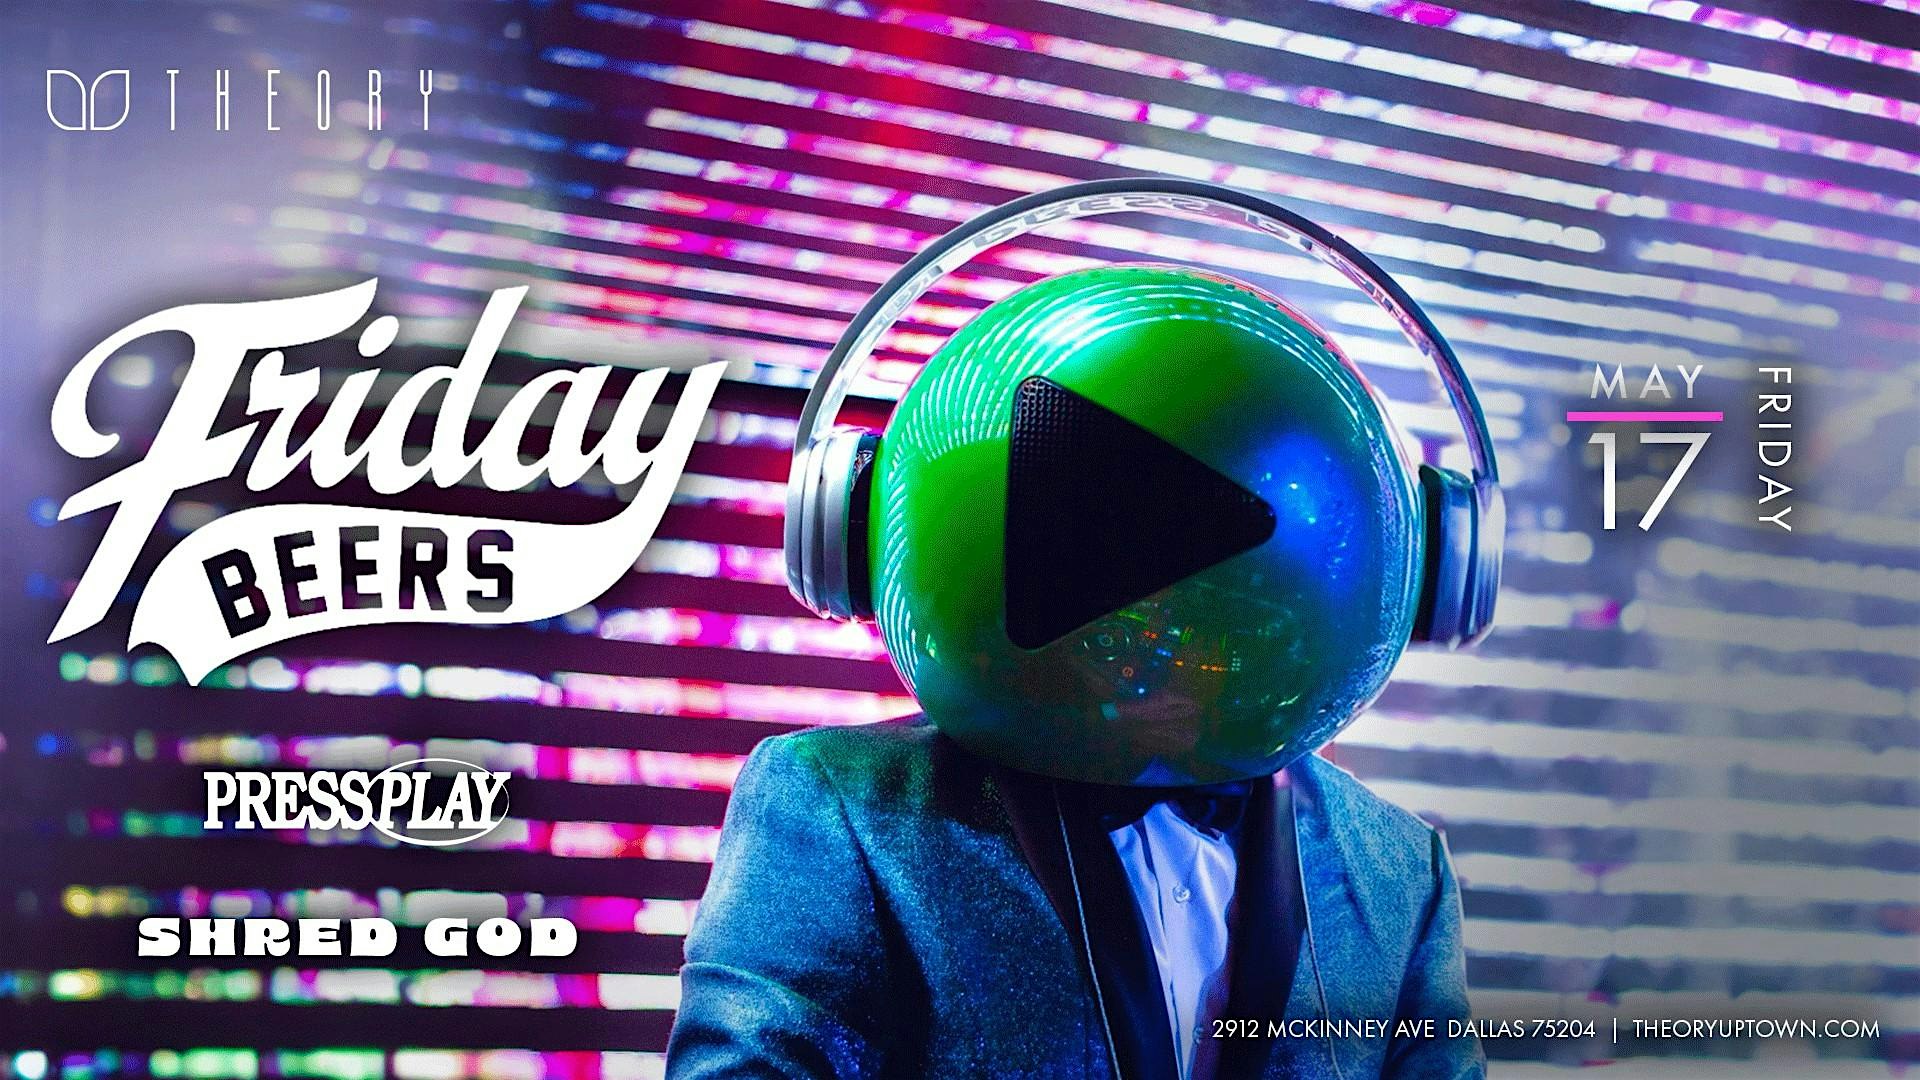 Friday Beers Takeover with Press Play!